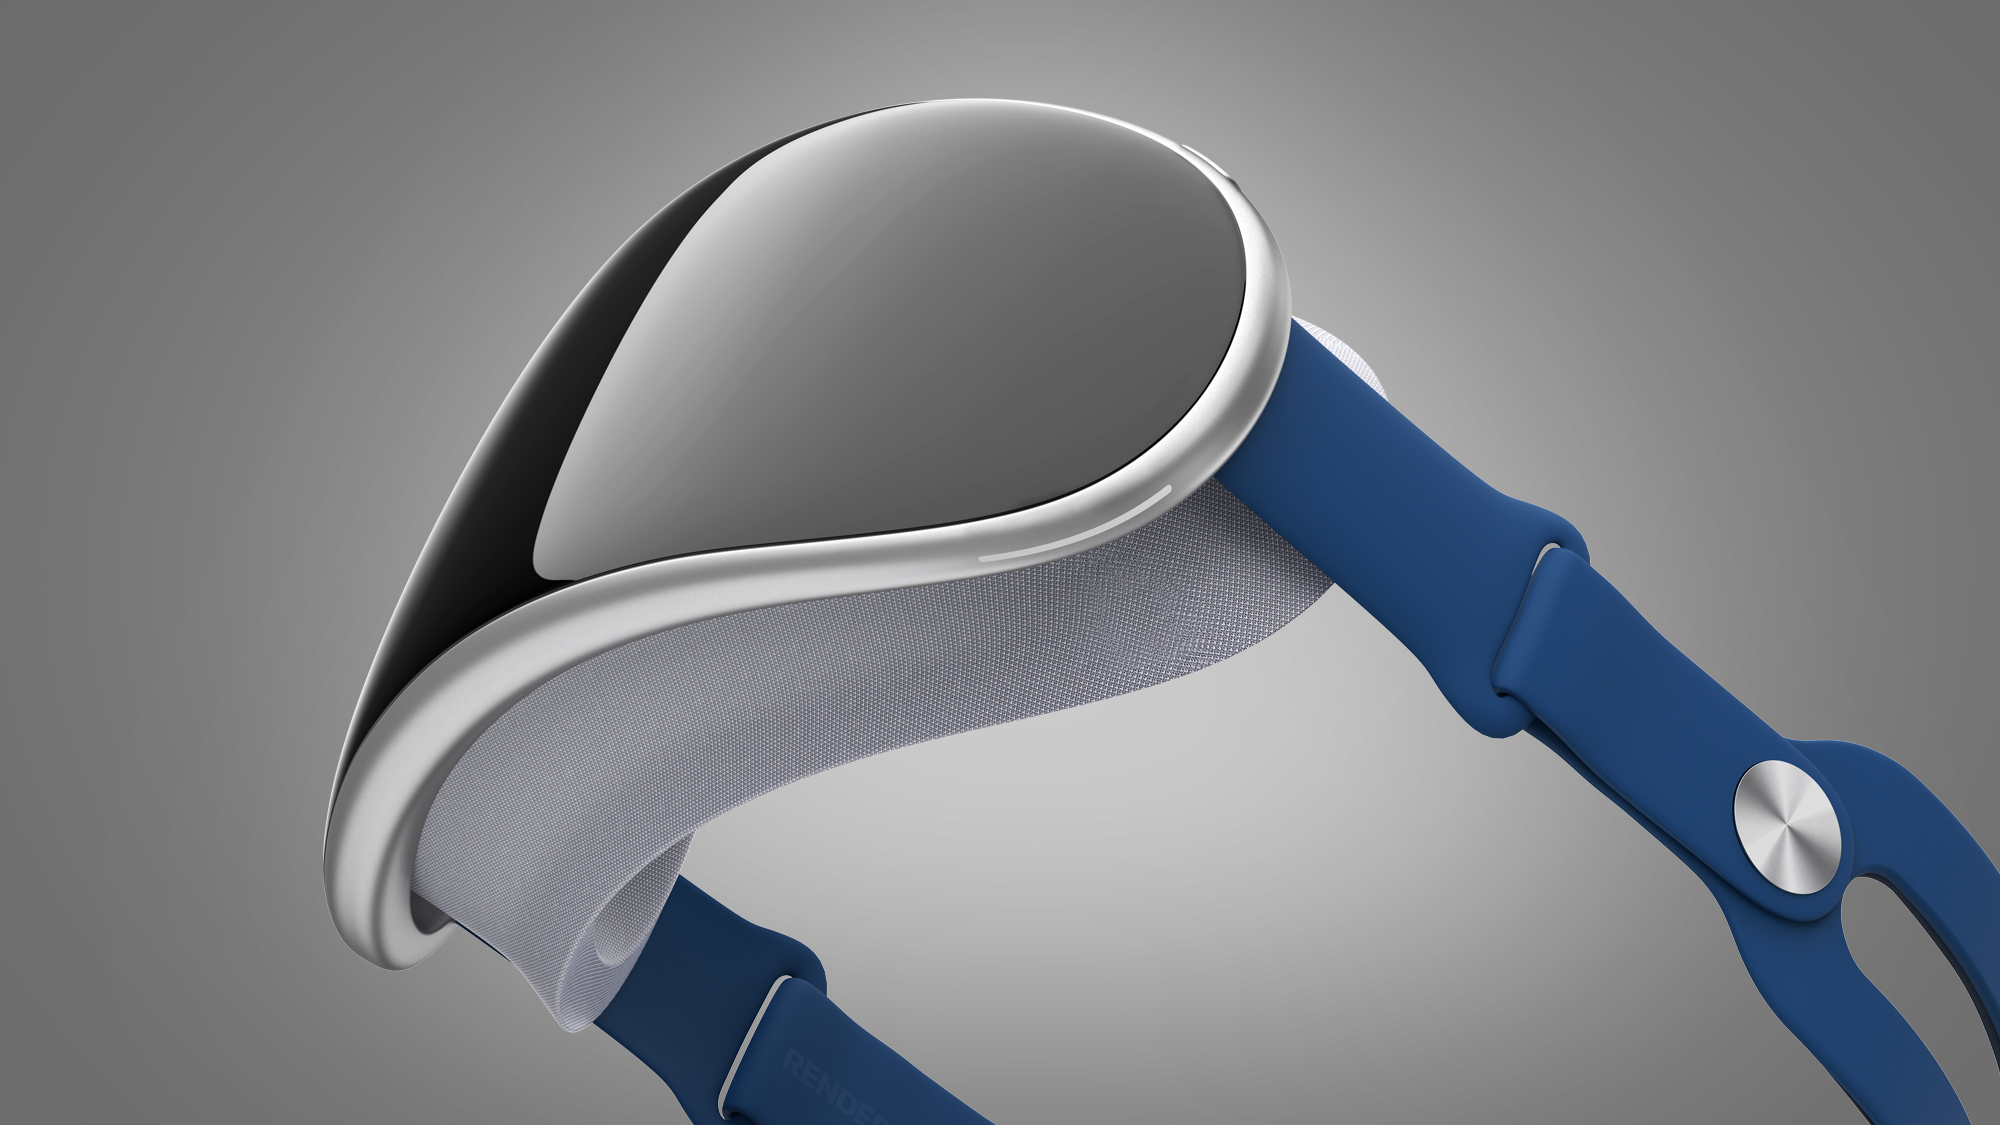 A rendering of the rumored Apple Reality Pro headset on a gray background